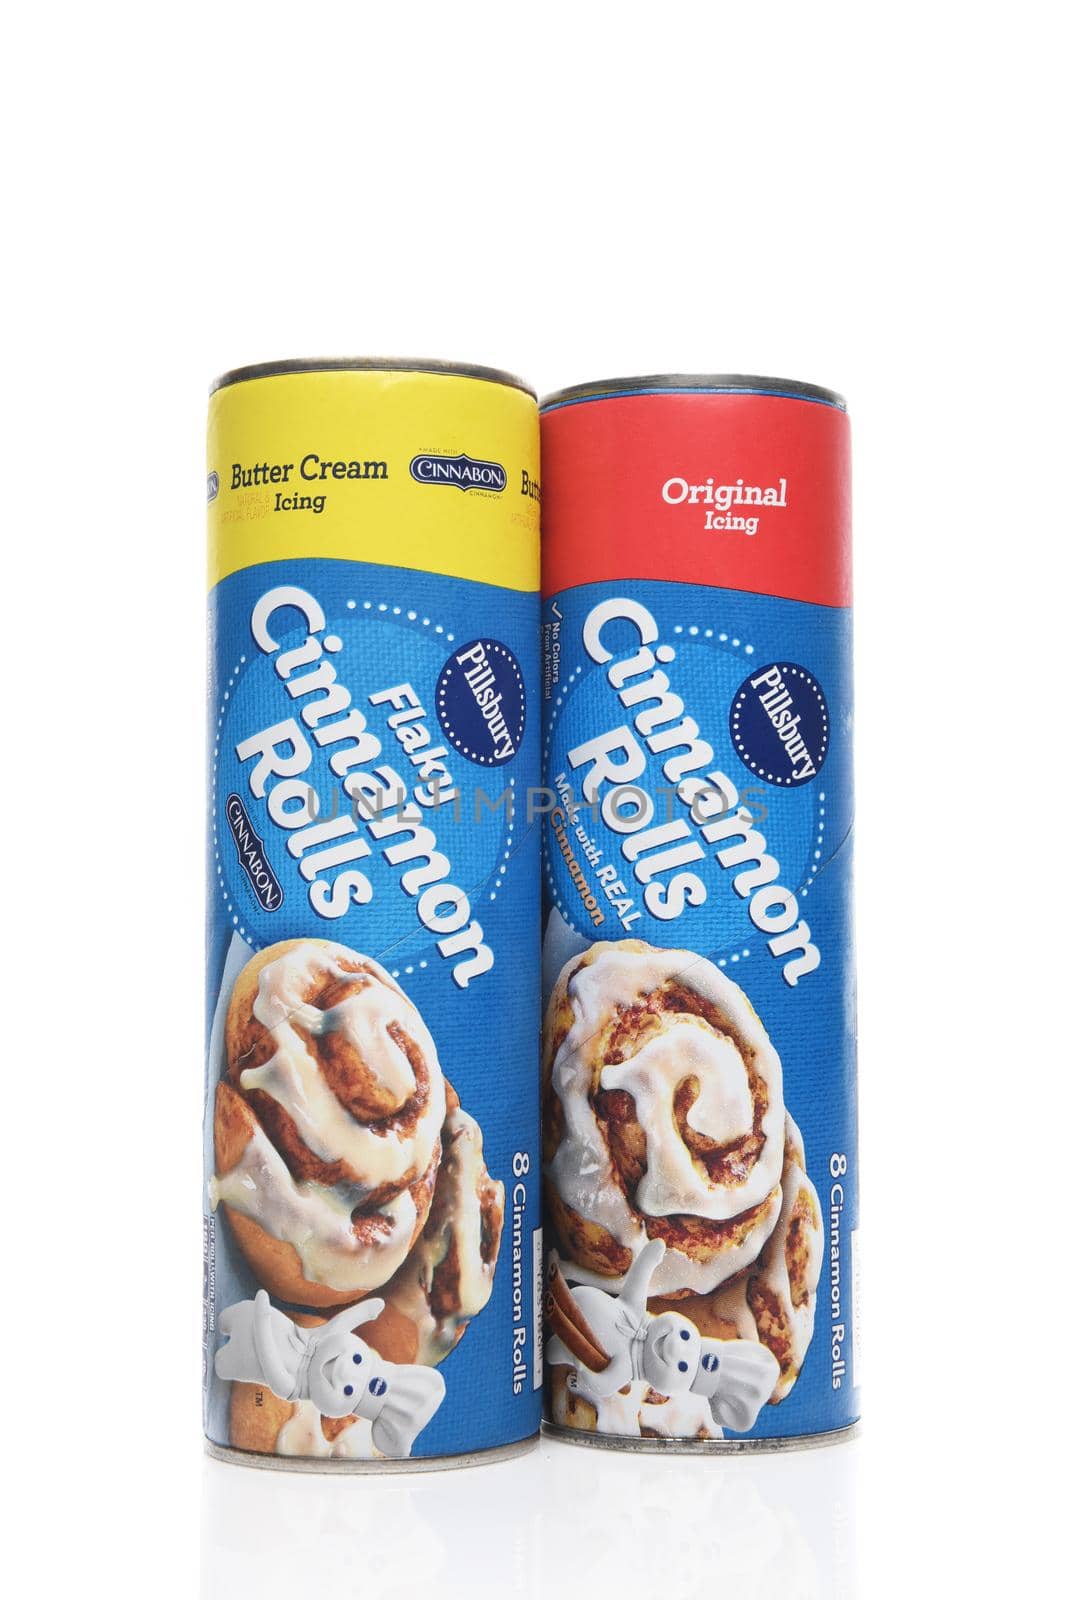 IRVINE, CALIFORNIA - AUGUST 14, 2019: Two packages of Pillsbury Cinnamon Rolls by sCukrov